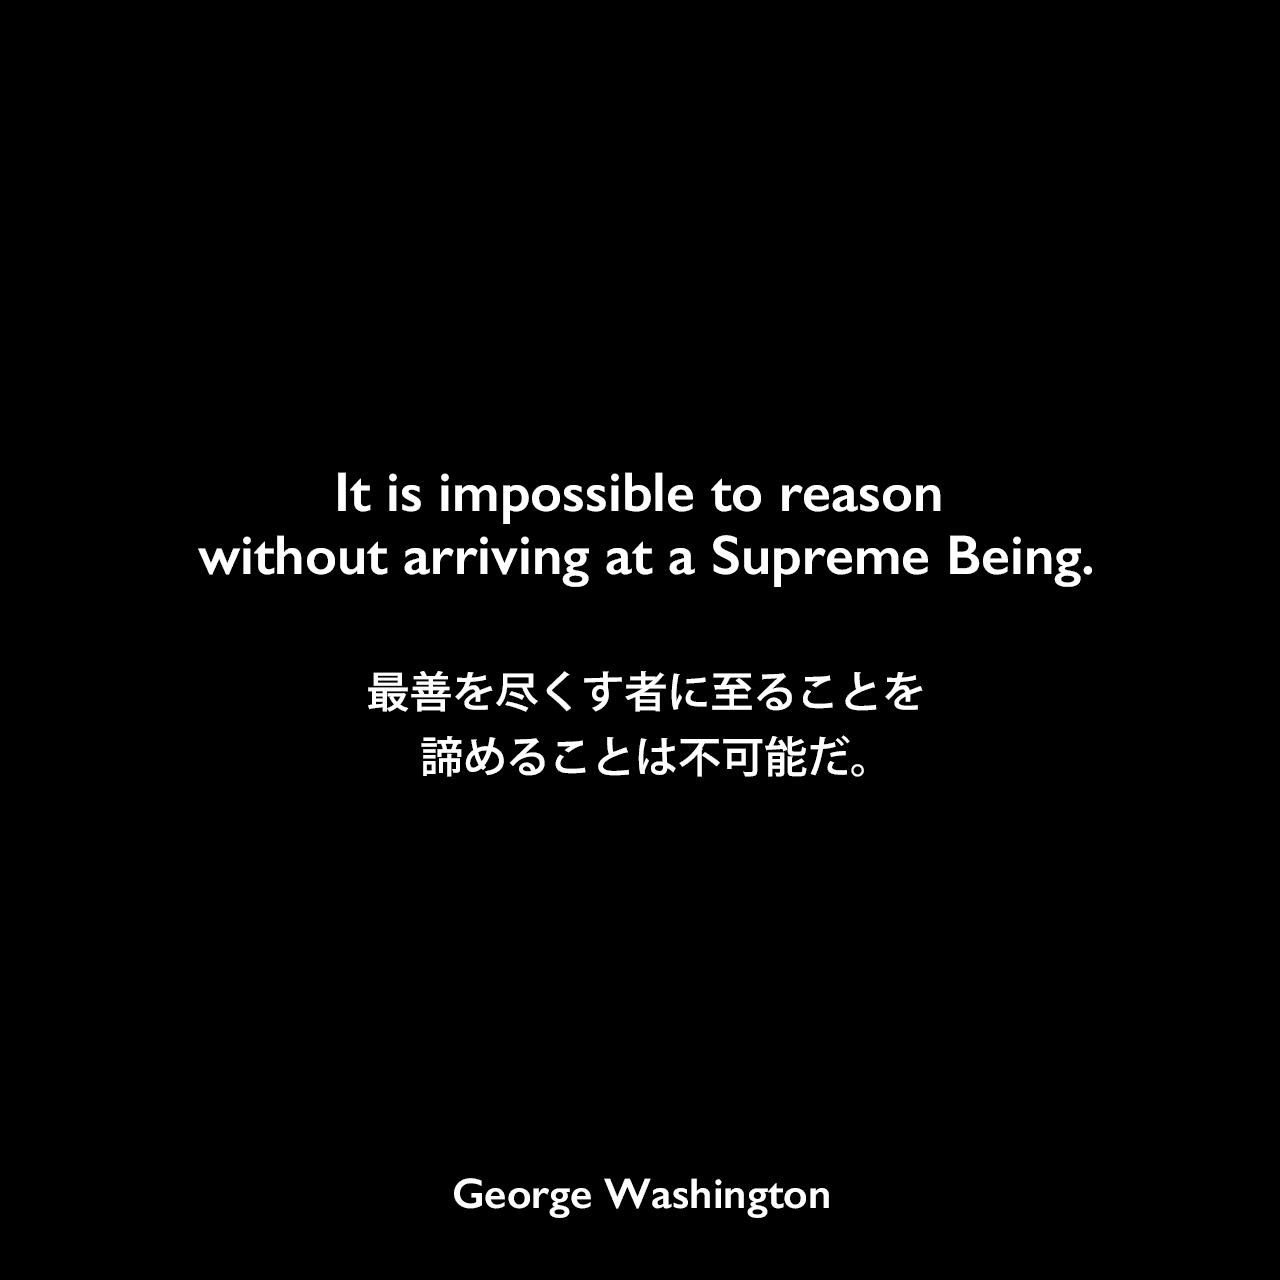 It is impossible to reason without arriving at a Supreme Being.最善を尽くす者に至ることを諦めることは不可能だ。George Washington